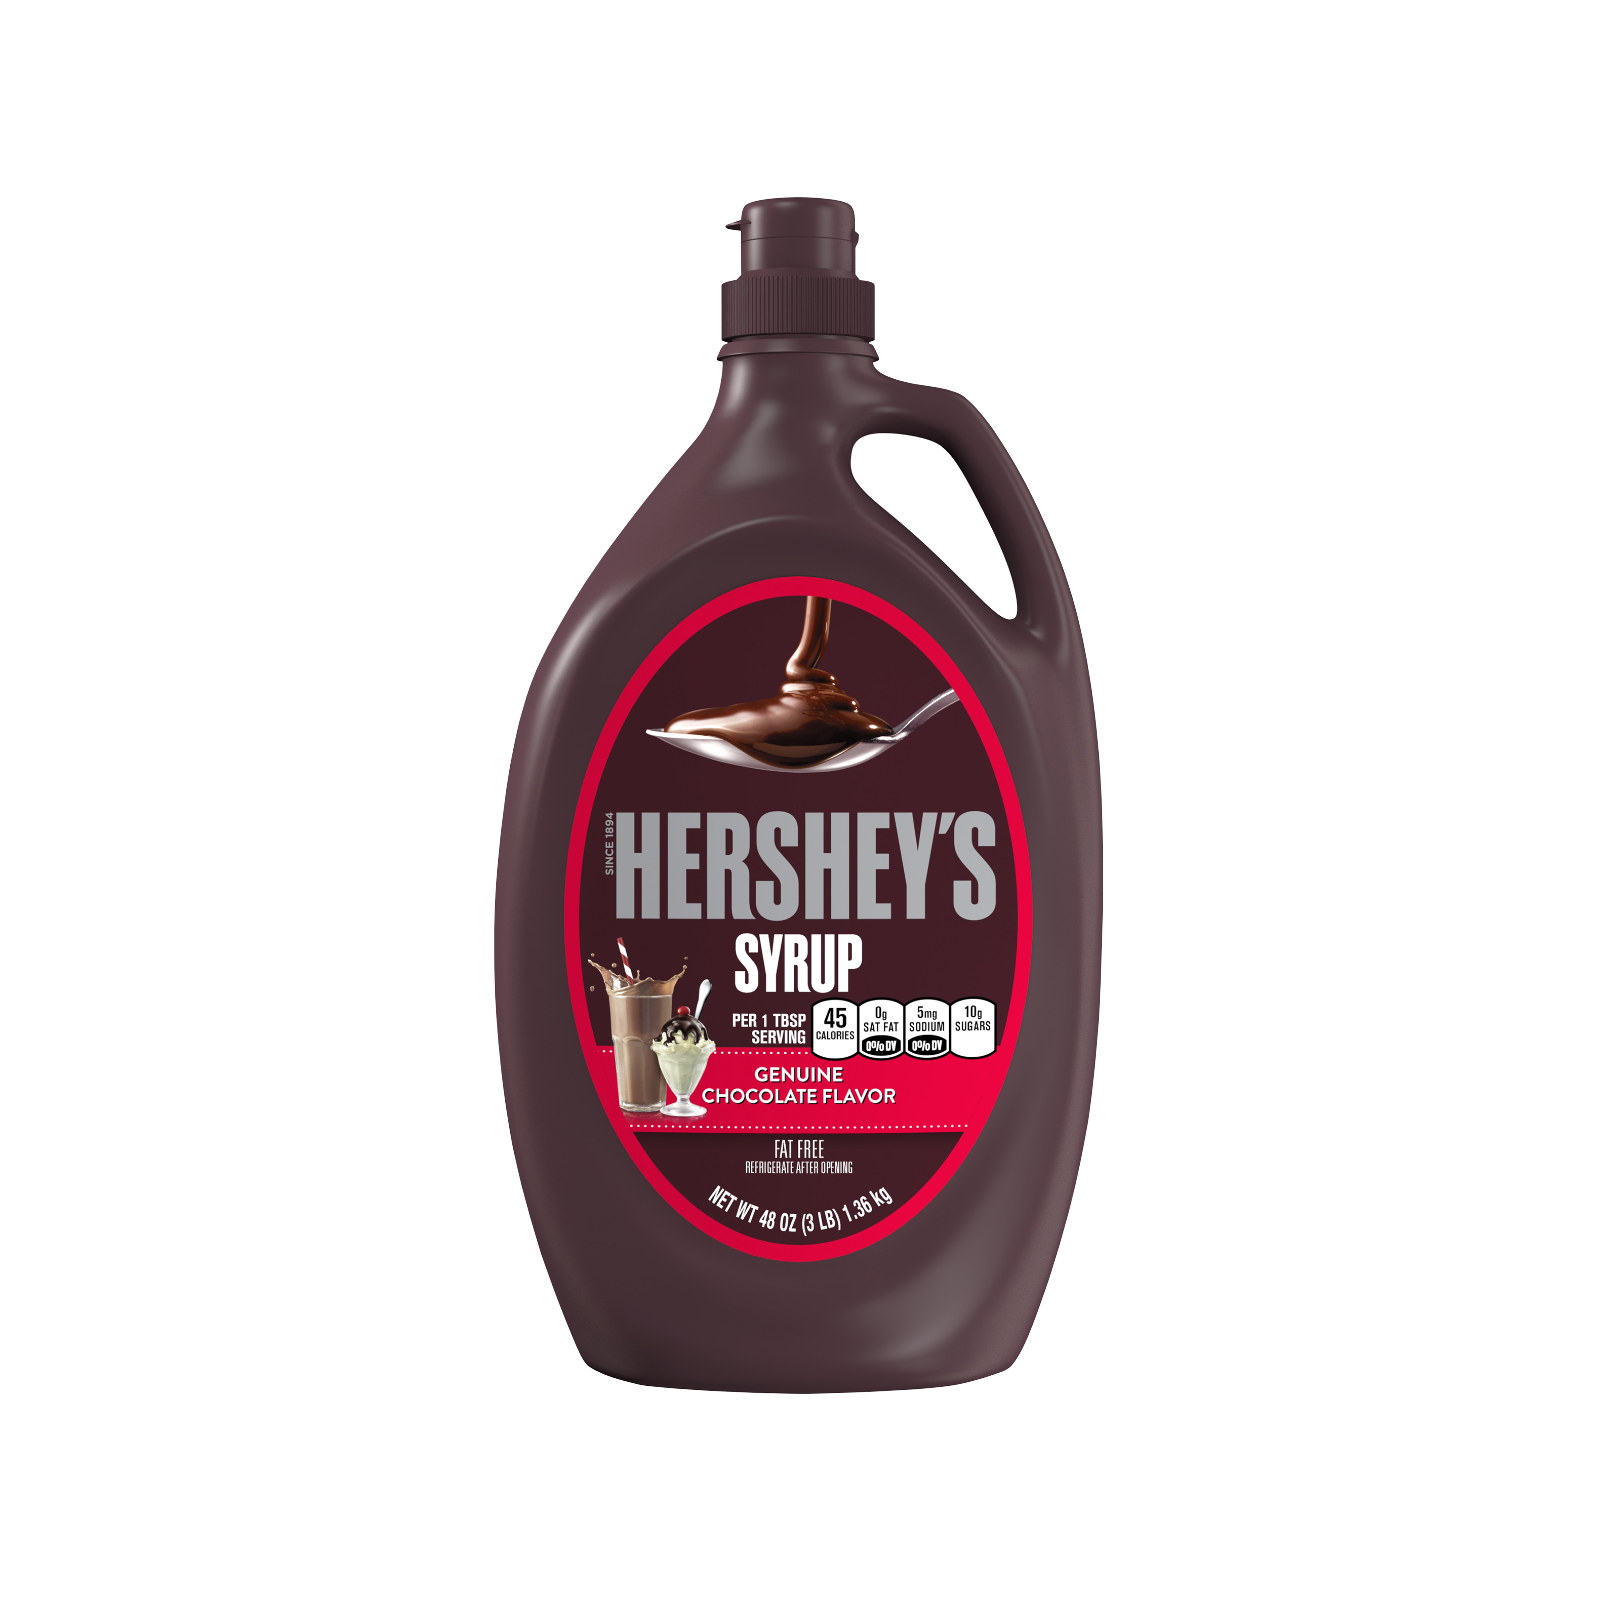 Hershey's Syrup Genuine Chocolate Flavour 1.36KG 48OZ.png